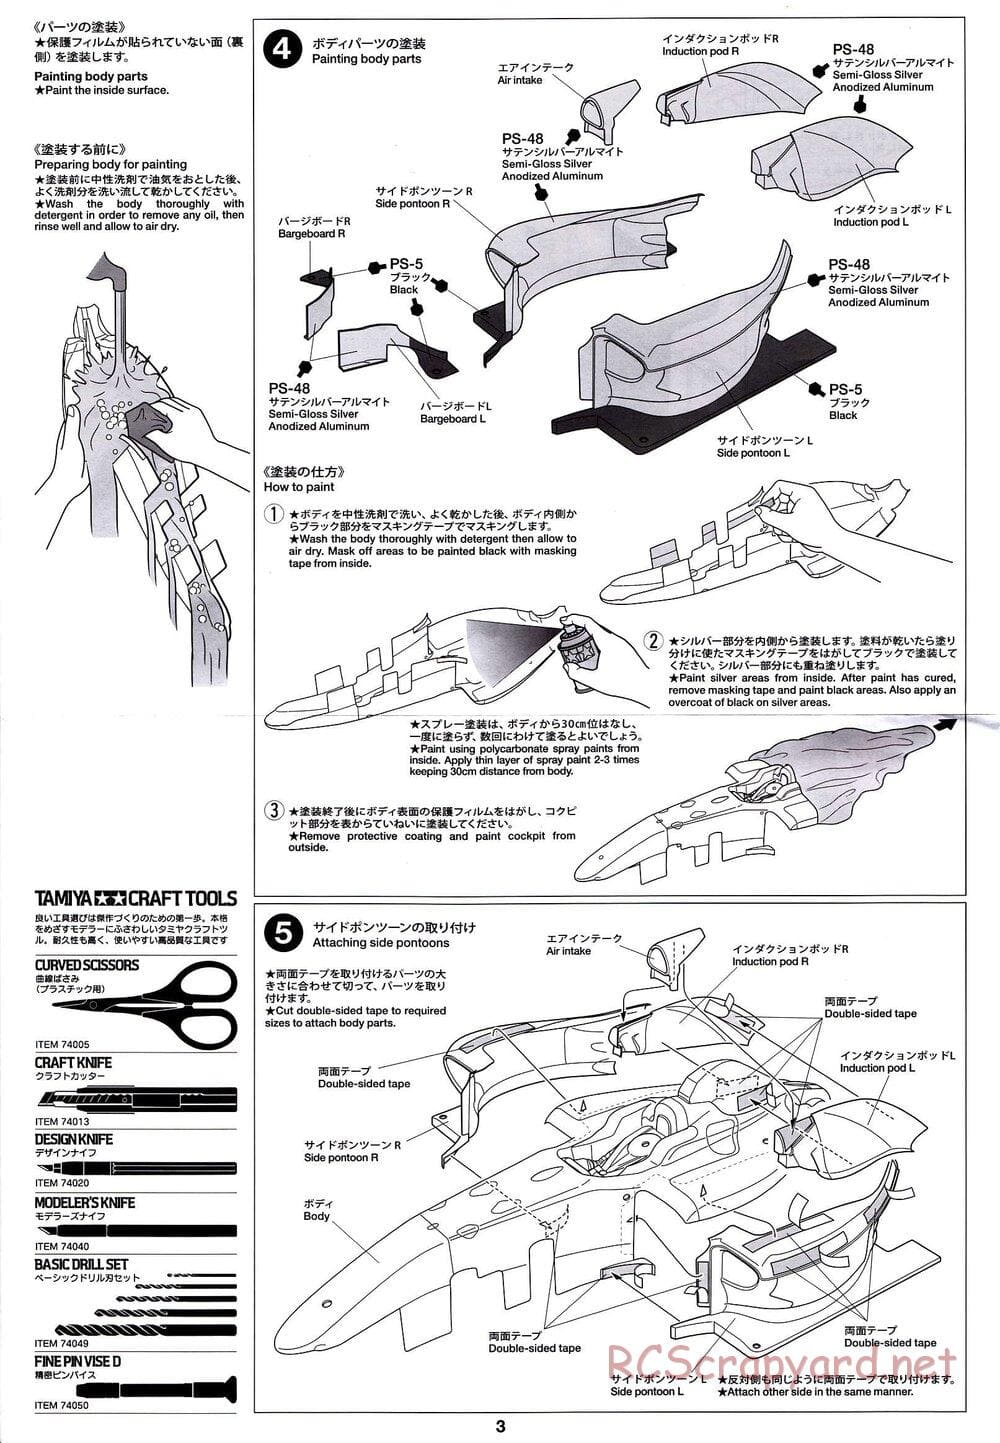 Tamiya - Vodafone McLaren Mercedes MP4-24 - F104 Chassis - Body Manual - Page 3